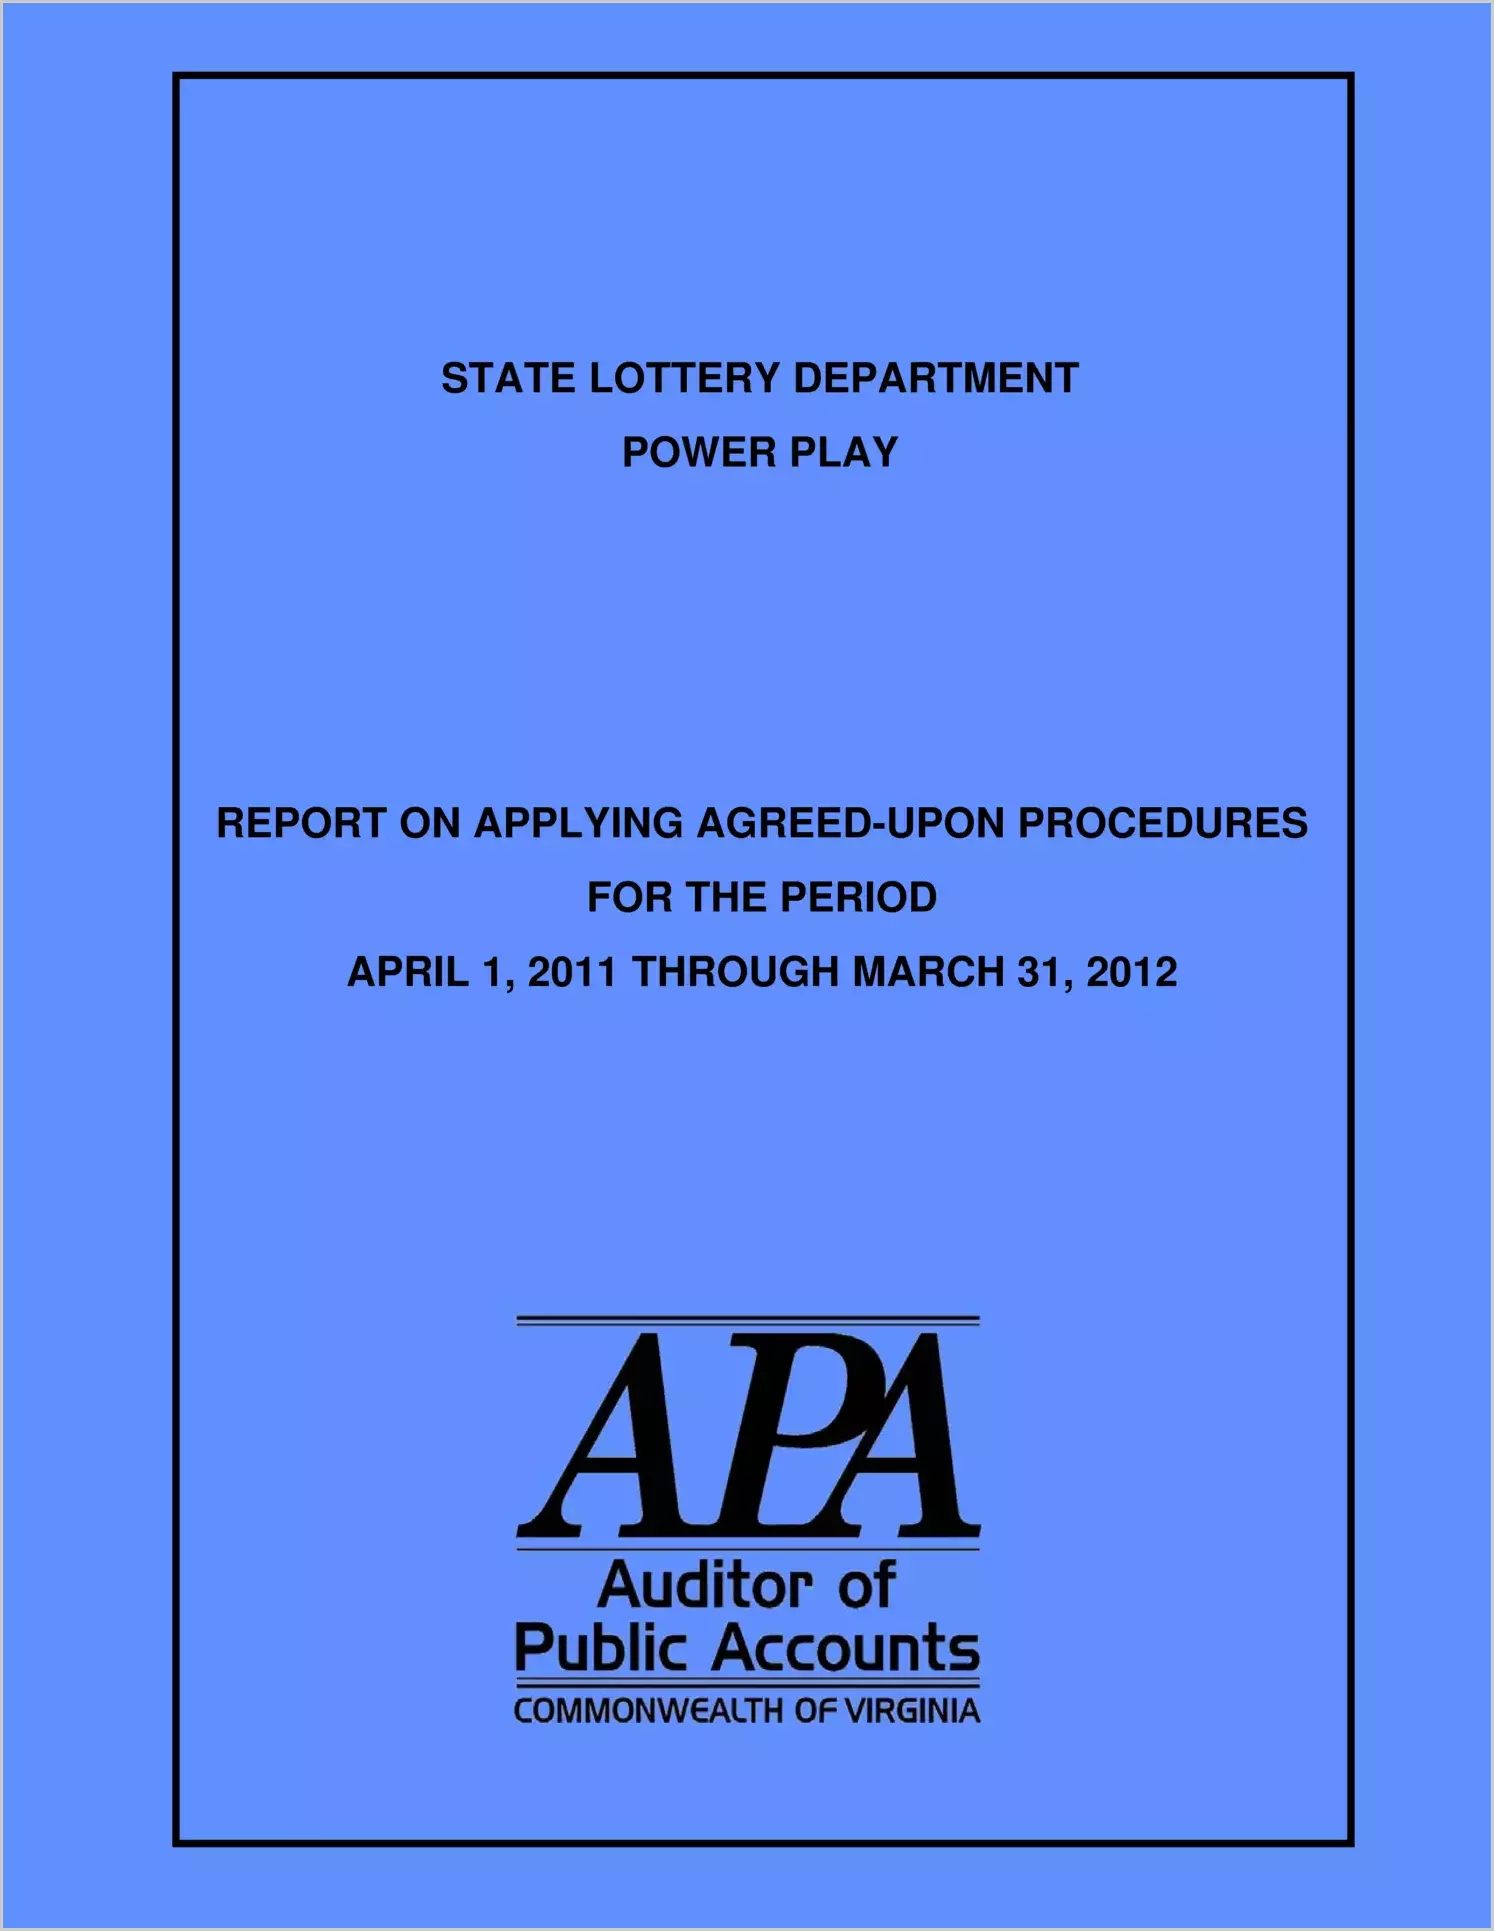 State Lottery Department: Power Play Report on Applying Agreed-Upon Procedures for the period January 31, 2011 through March 31, 2012